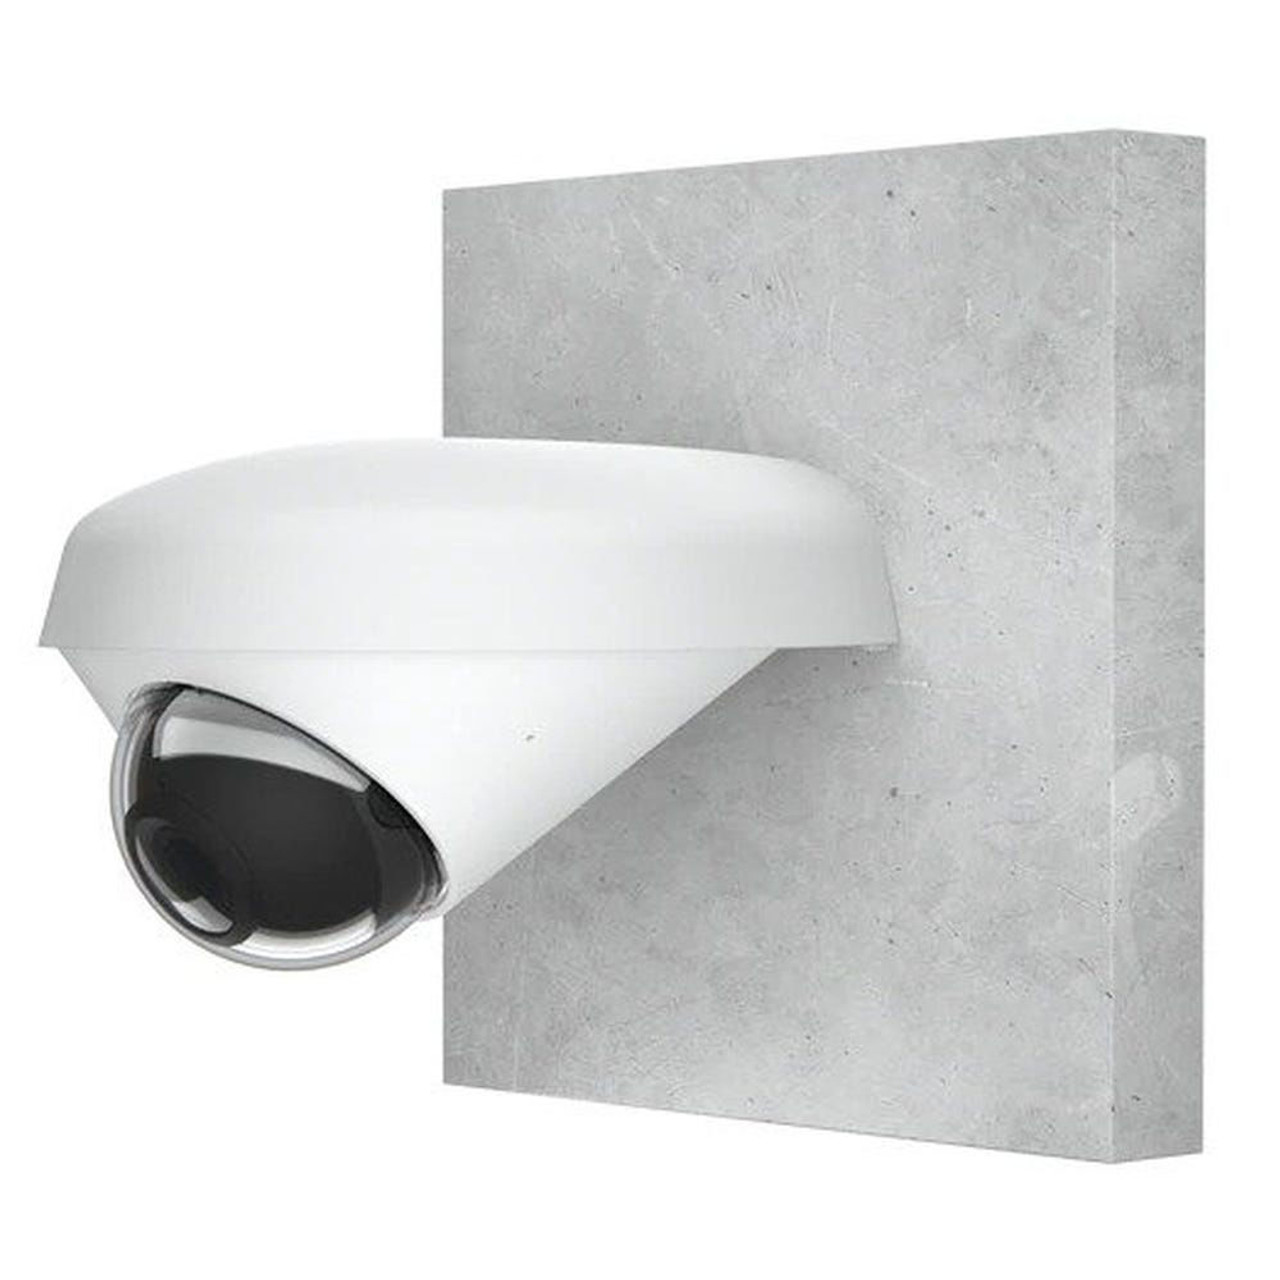 Ubiquiti | UACC-G4-Dome-Arm
Mount For G4 and G5 Dome
Cameras